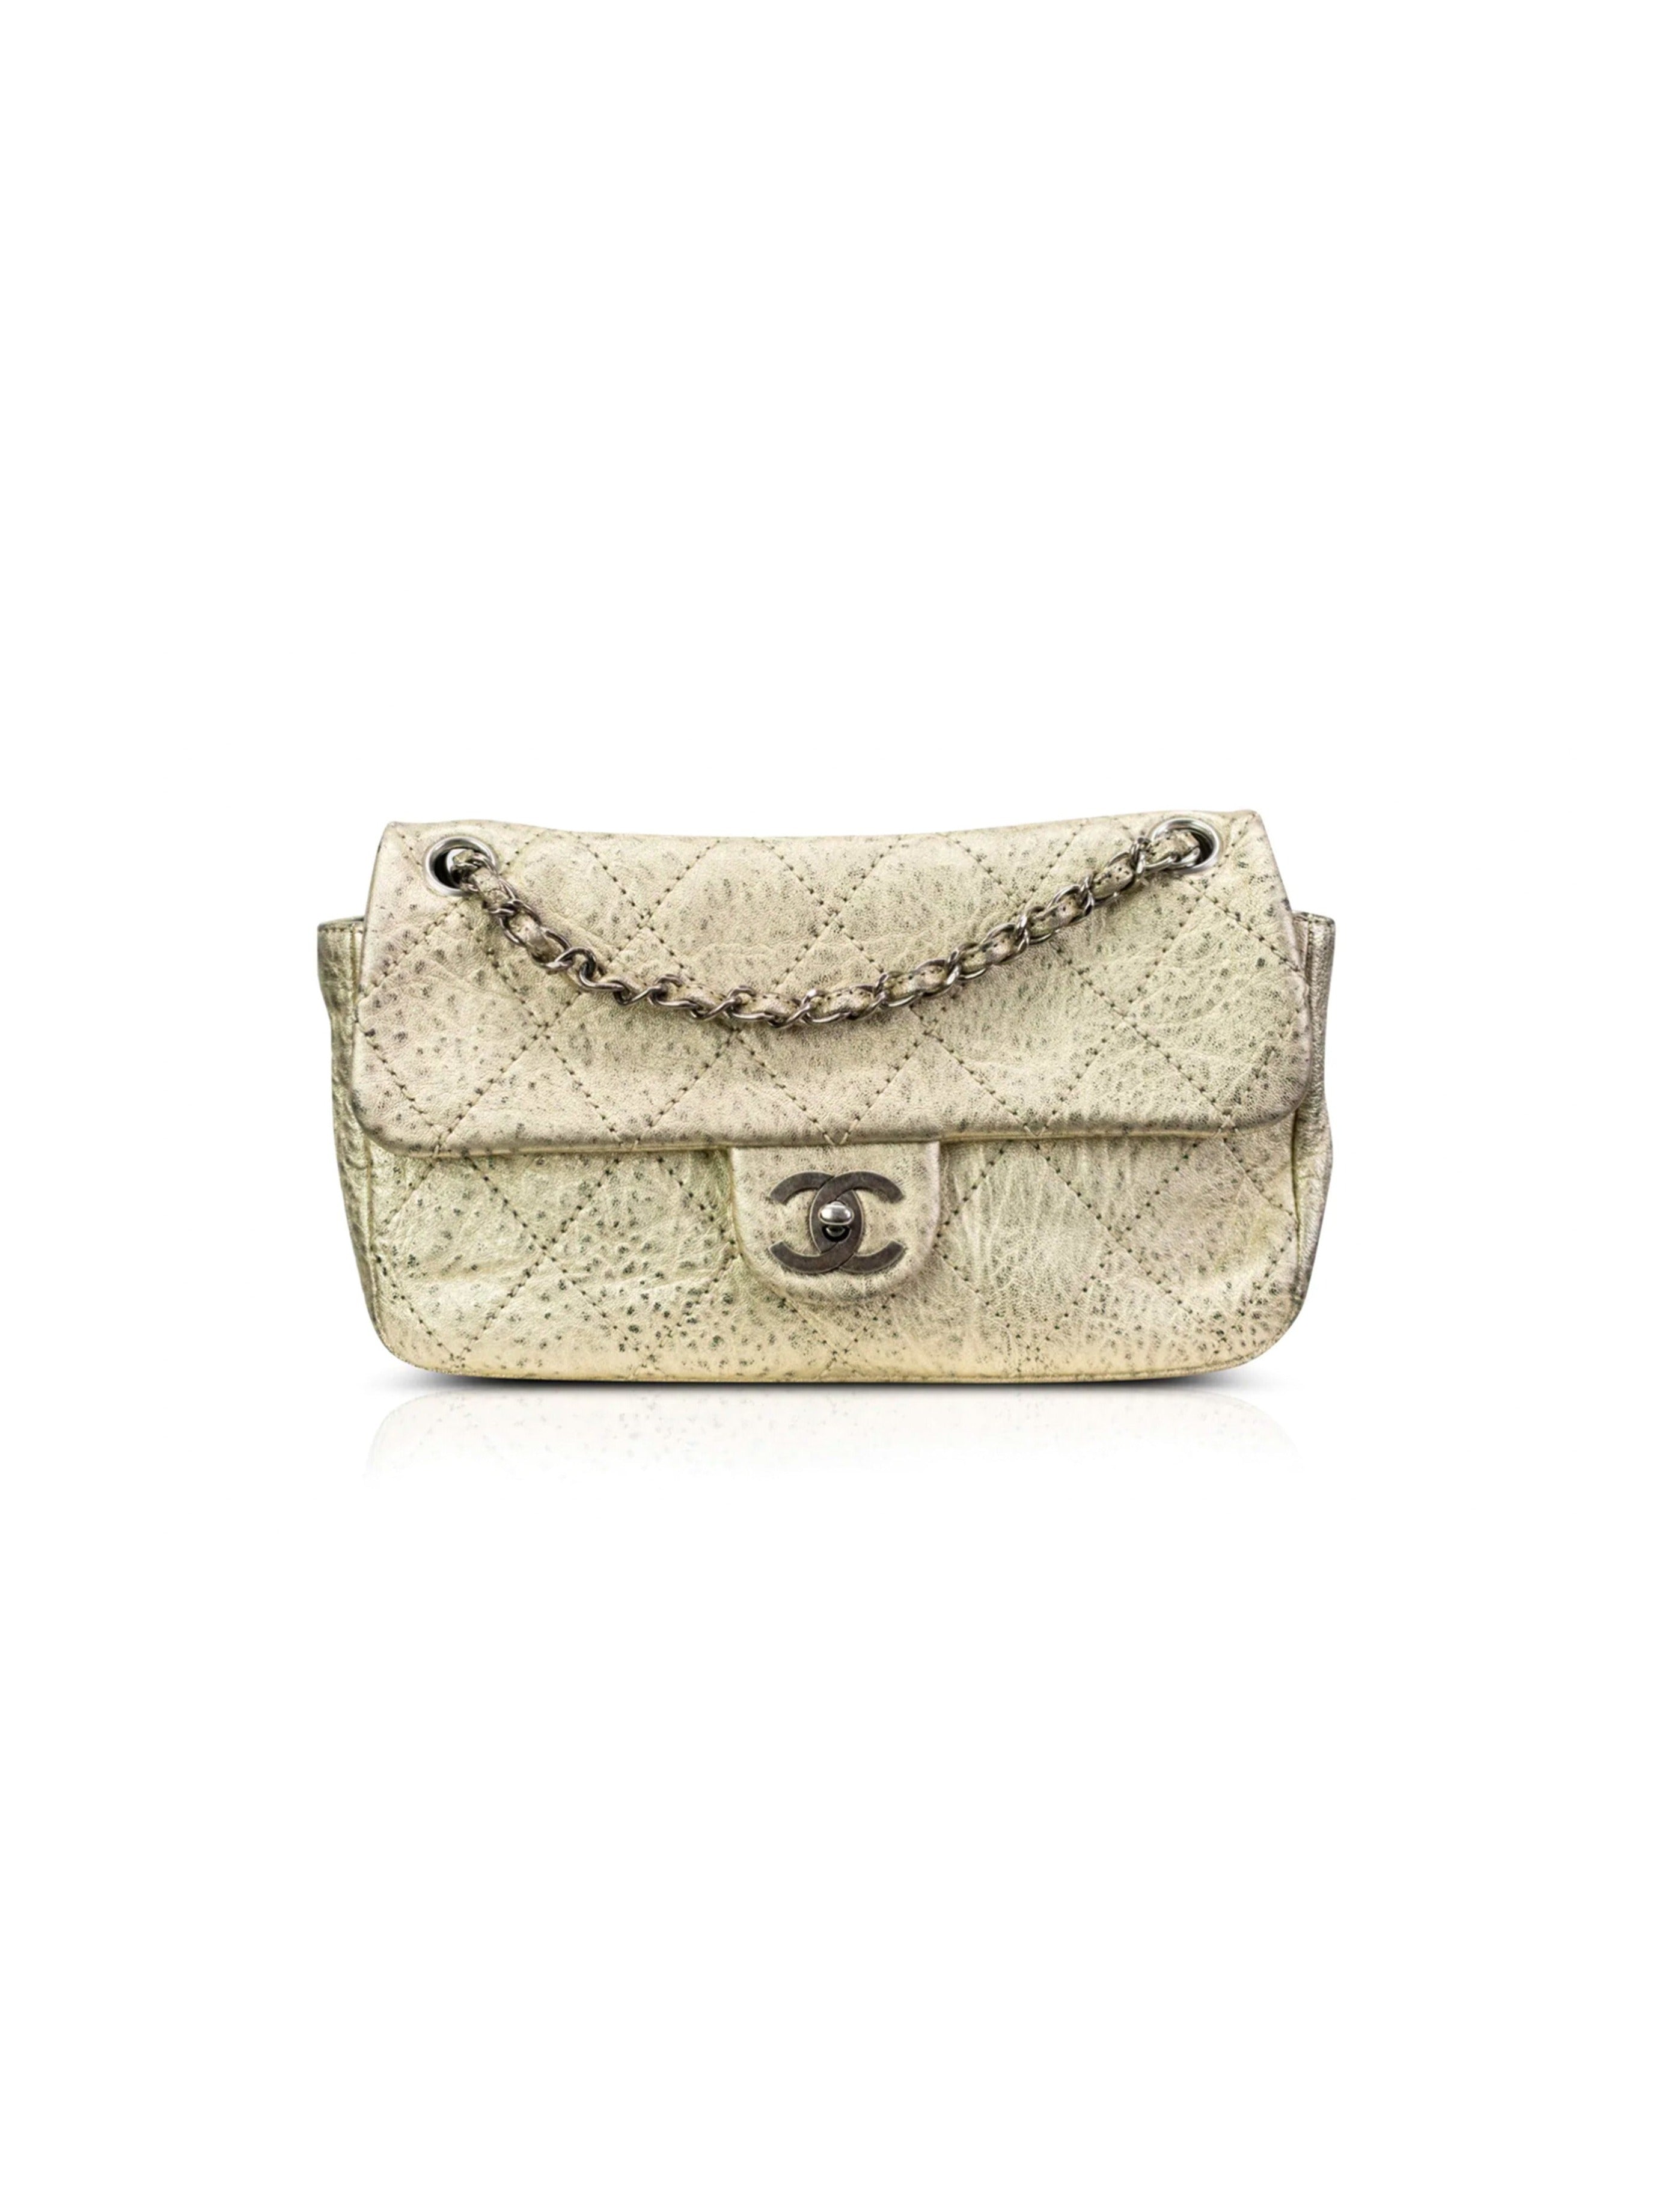 Rent Chanel Jewelry & Handbags at only $55/month